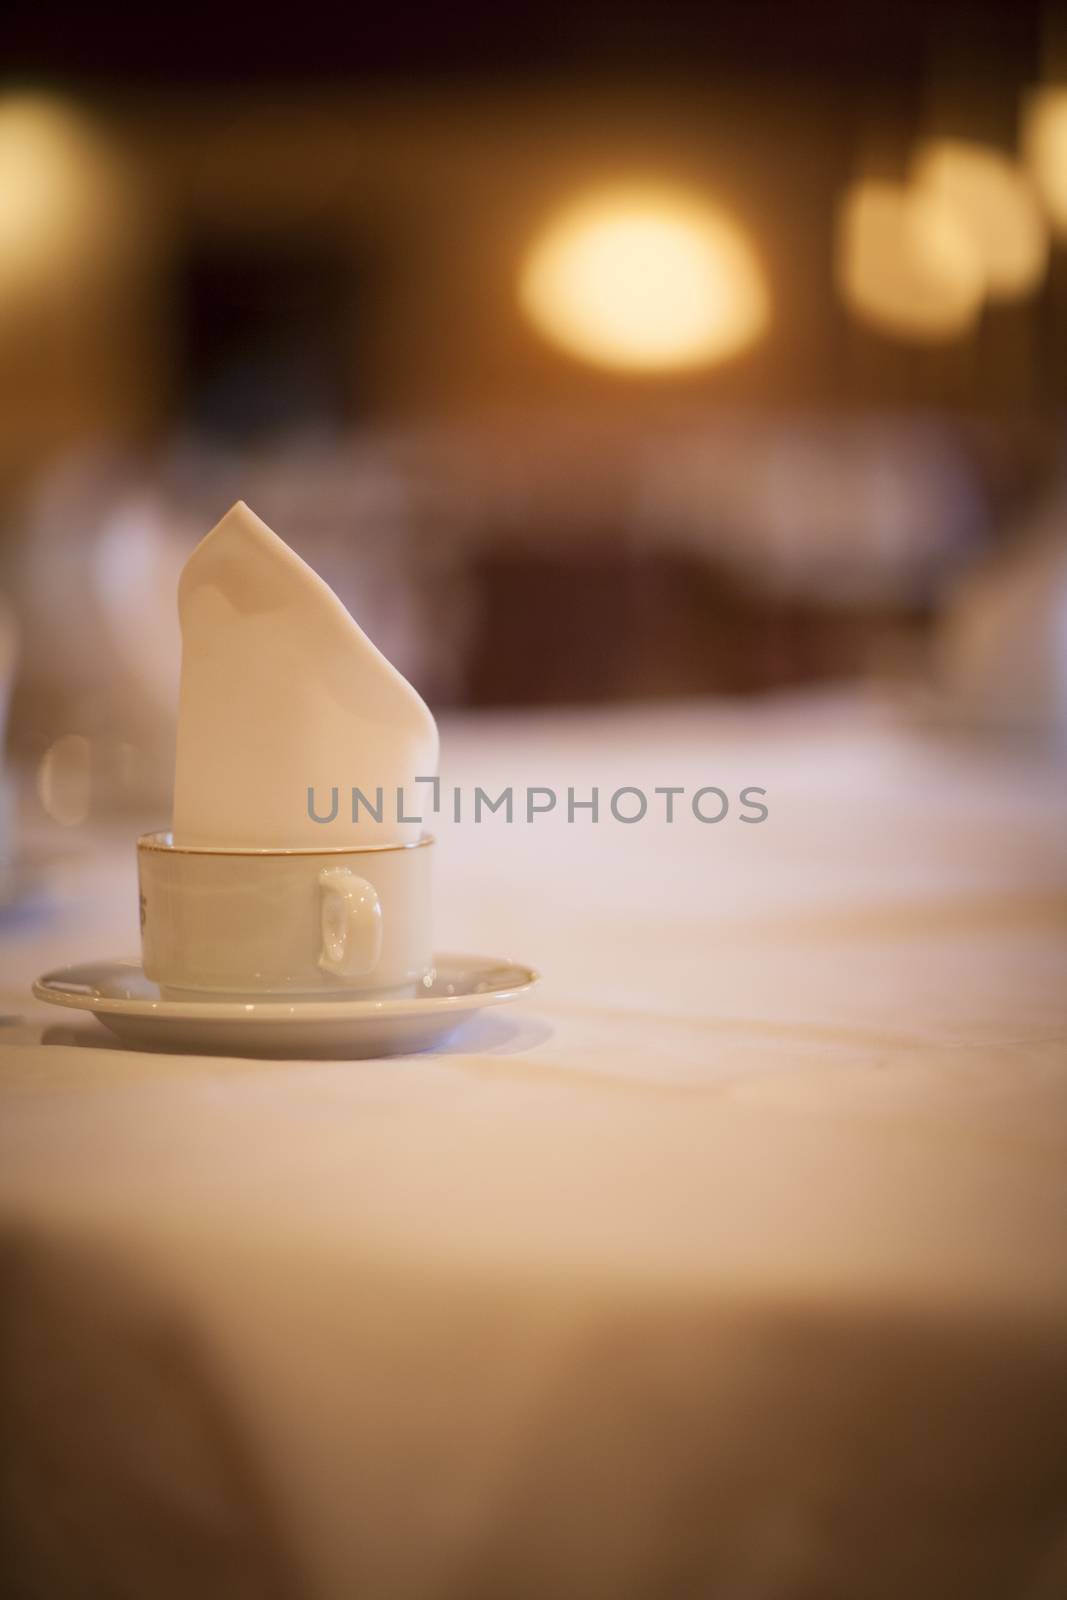 Coffee tea cup on wedding marriage reception banquet table with saucer and serviette close-up photo with defocused background. 